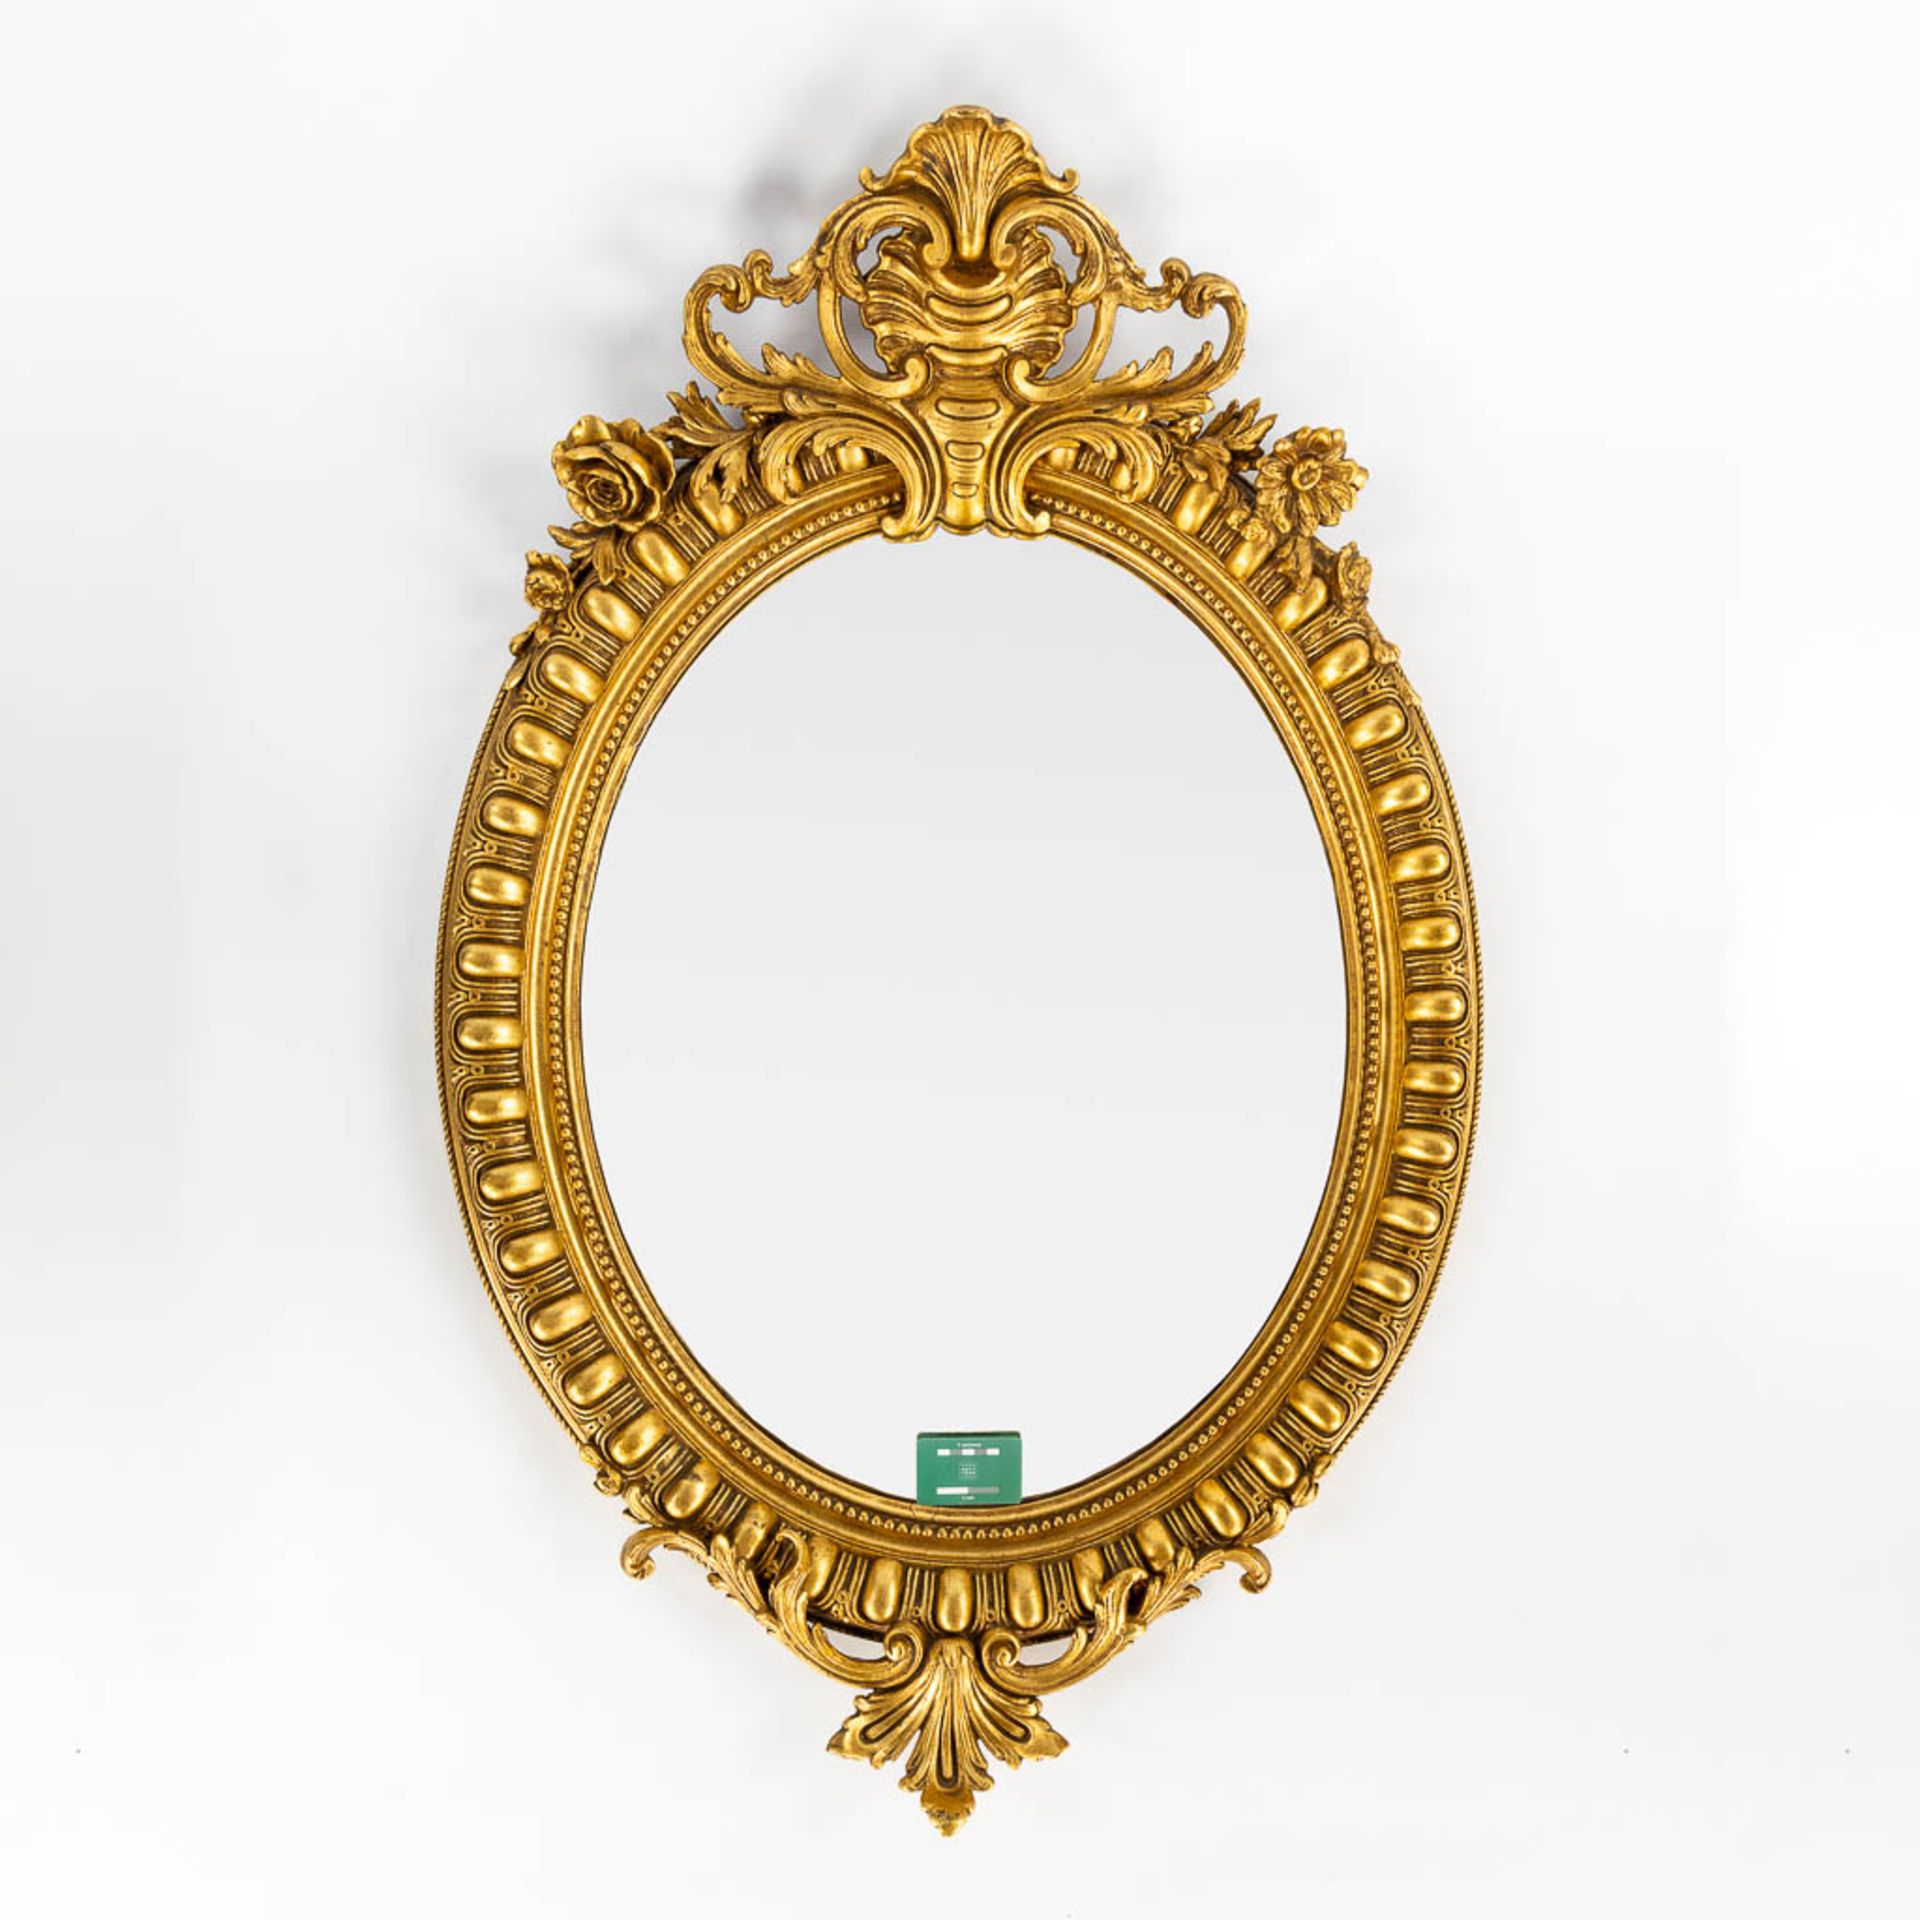 An antique mirror, gilt in a Louis XV style. 19th C. (W:89 x H:126 cm) - Image 2 of 8